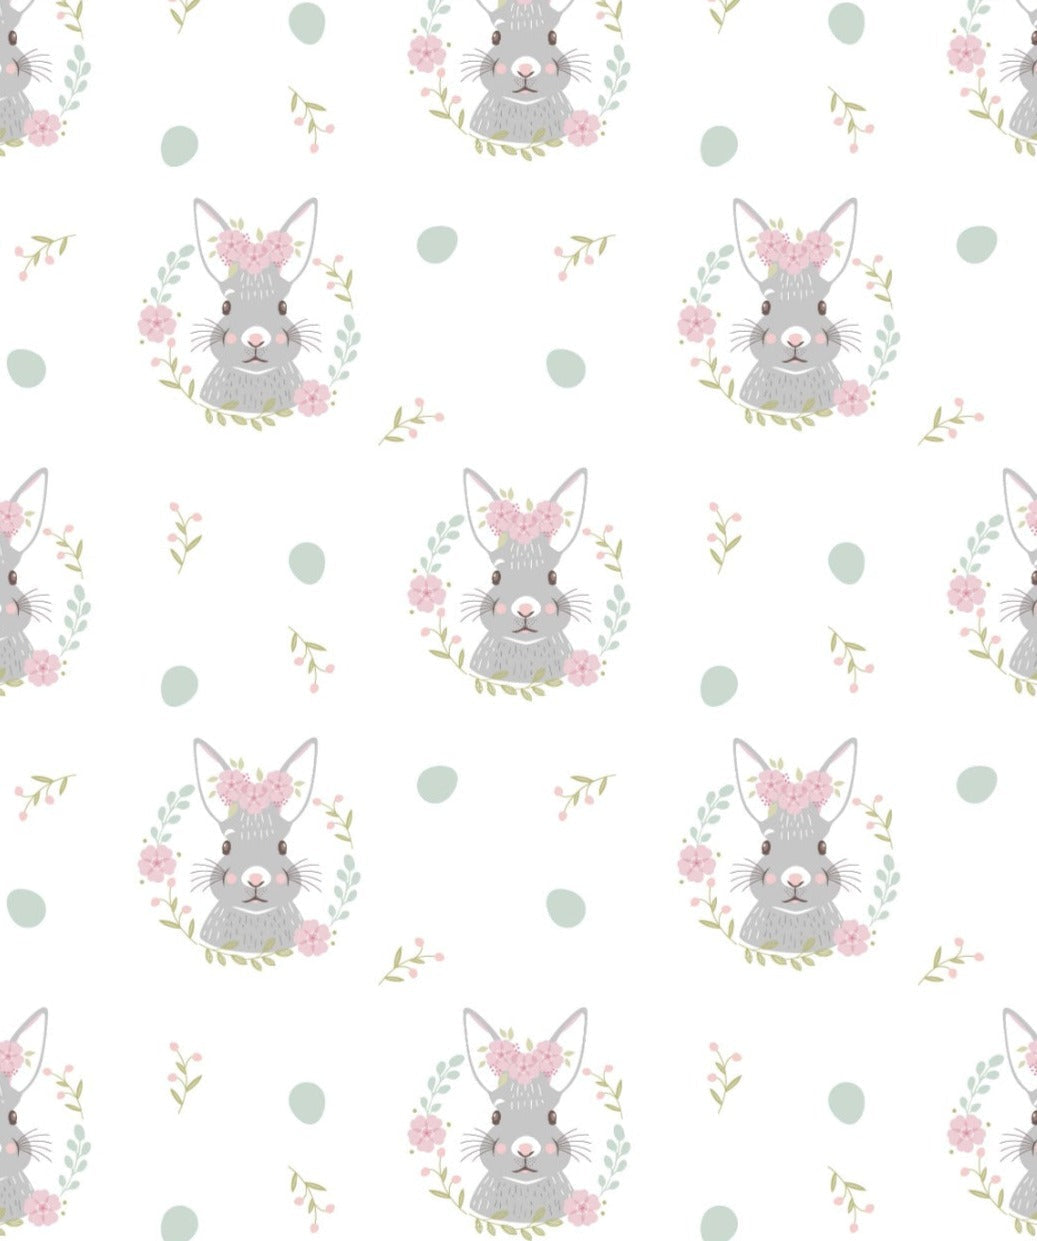 Cute little grey bunnies in a pink floral wreath on a white cotton fabric - Little Explorer by Craft Cotton Co.